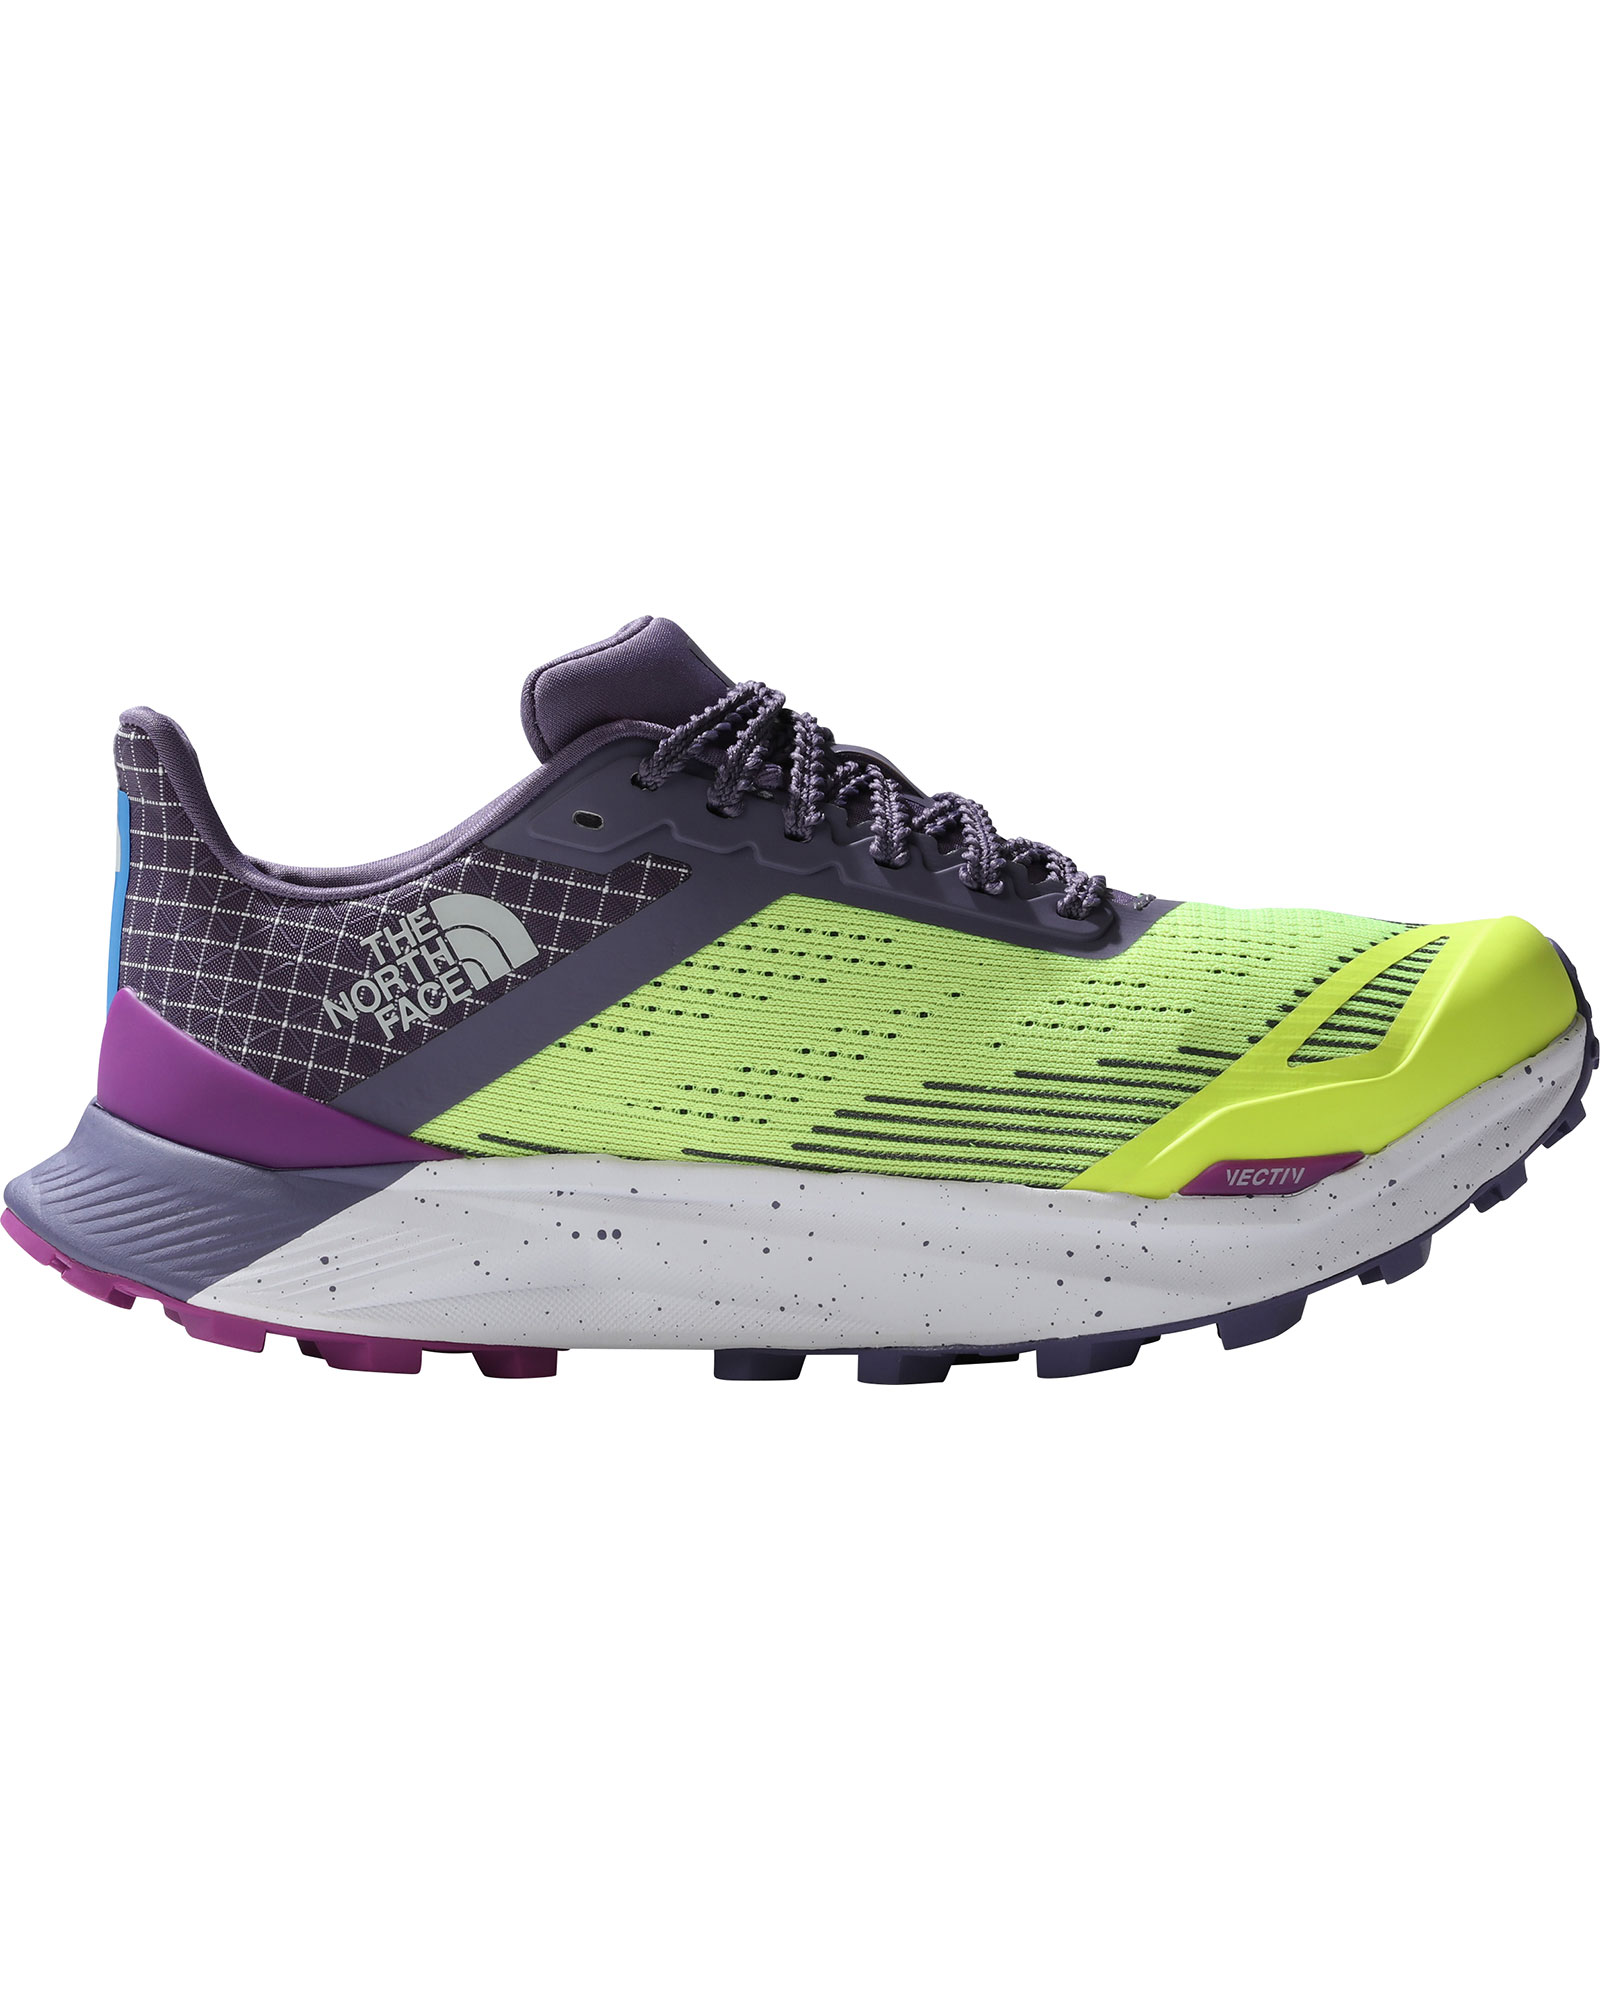 The North Face Vectiv Infinite 2 Women's Trail Shoes 0